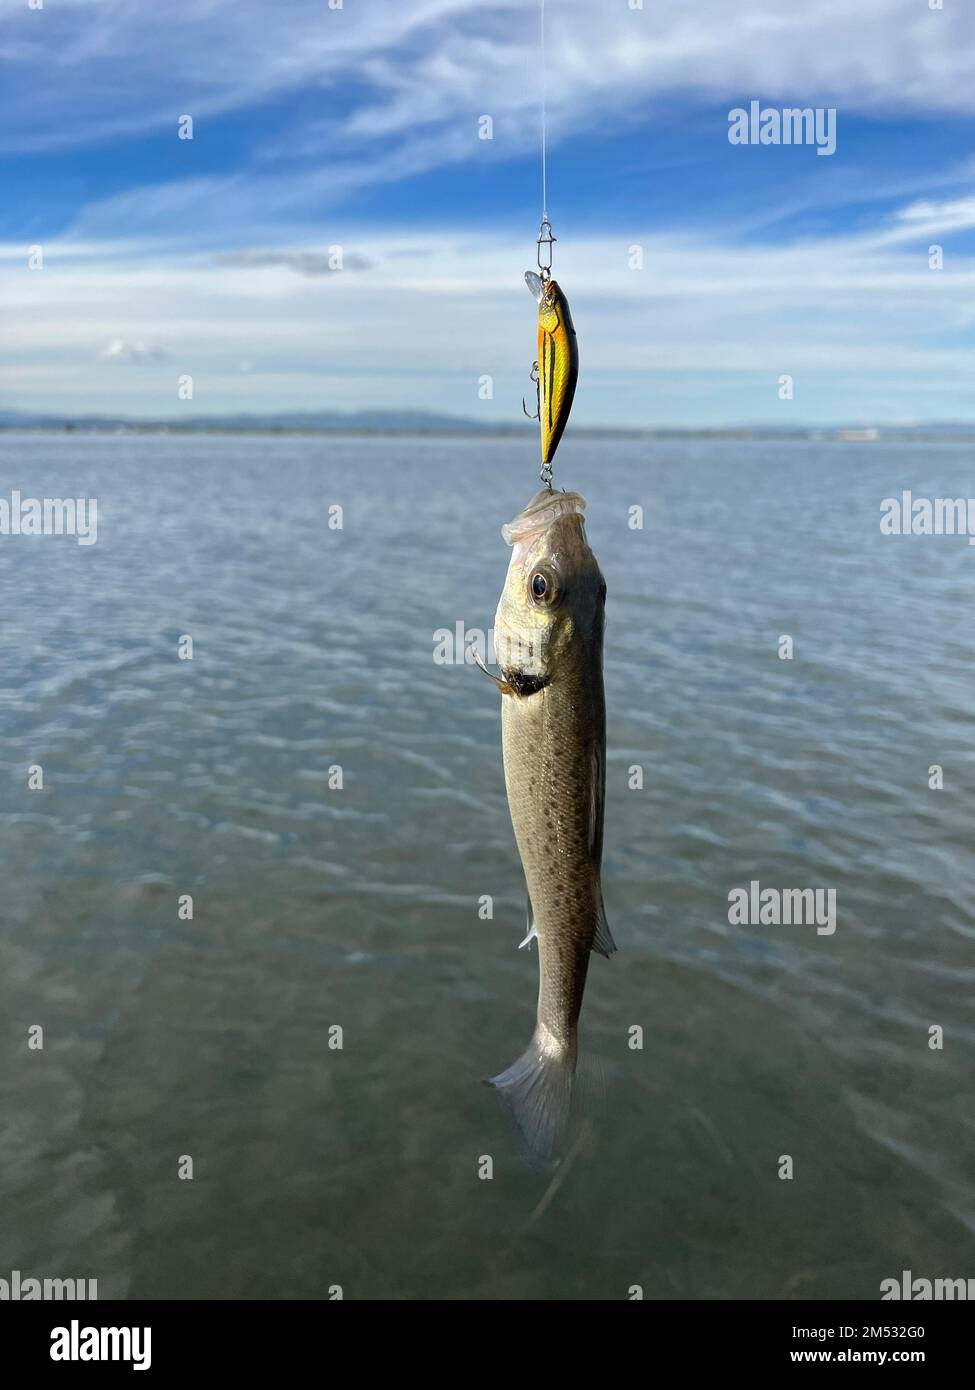 A big fish catching small one hanging from a fish hook Stock Photo - Alamy